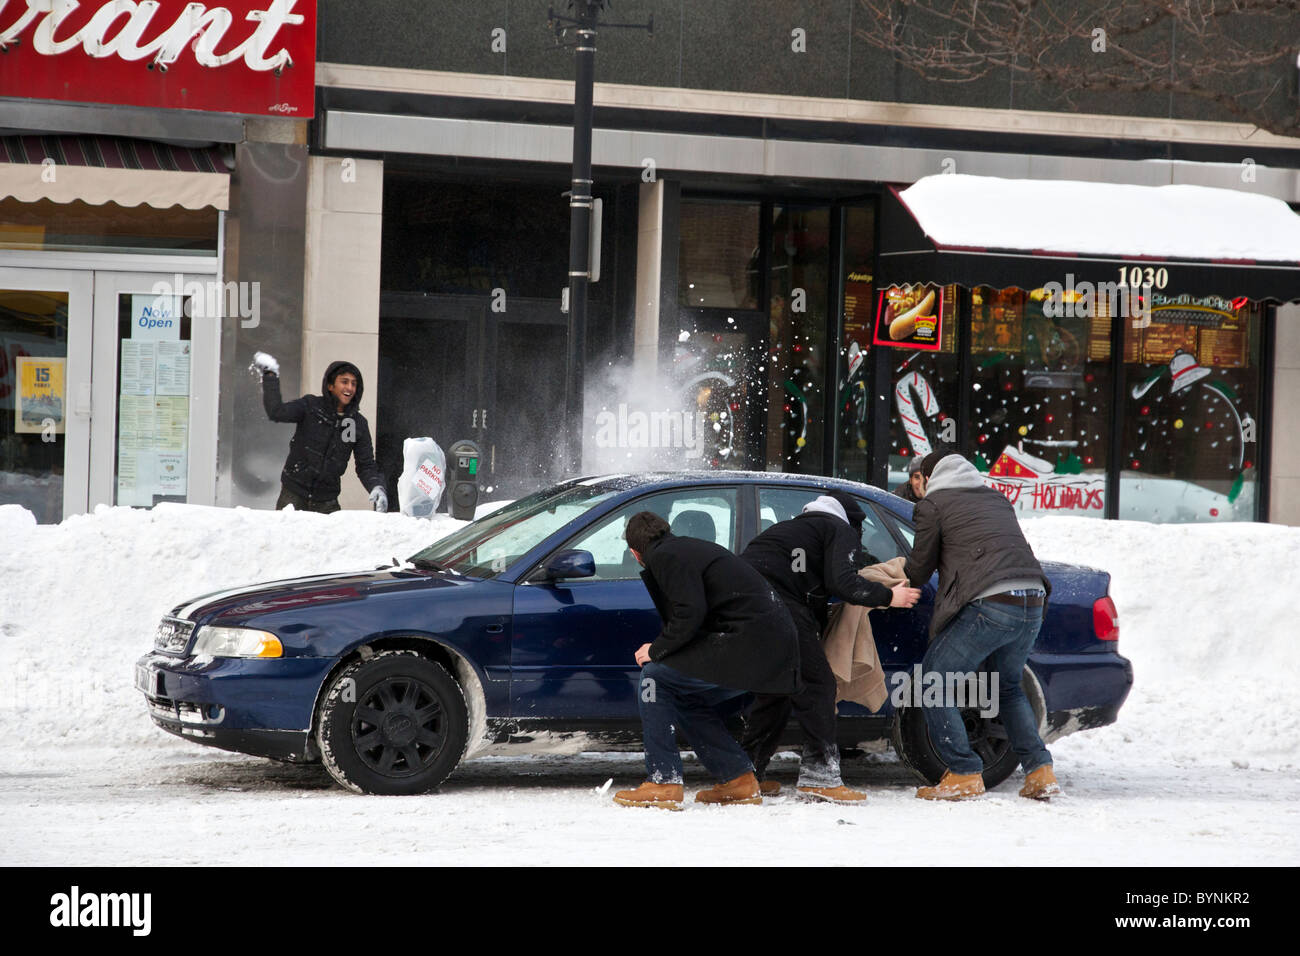 Snowball fight combatants take cover behind car as opponent lobs snowballs. Oak Park Illinois Chicago Blizzard of 2011 Stock Photo